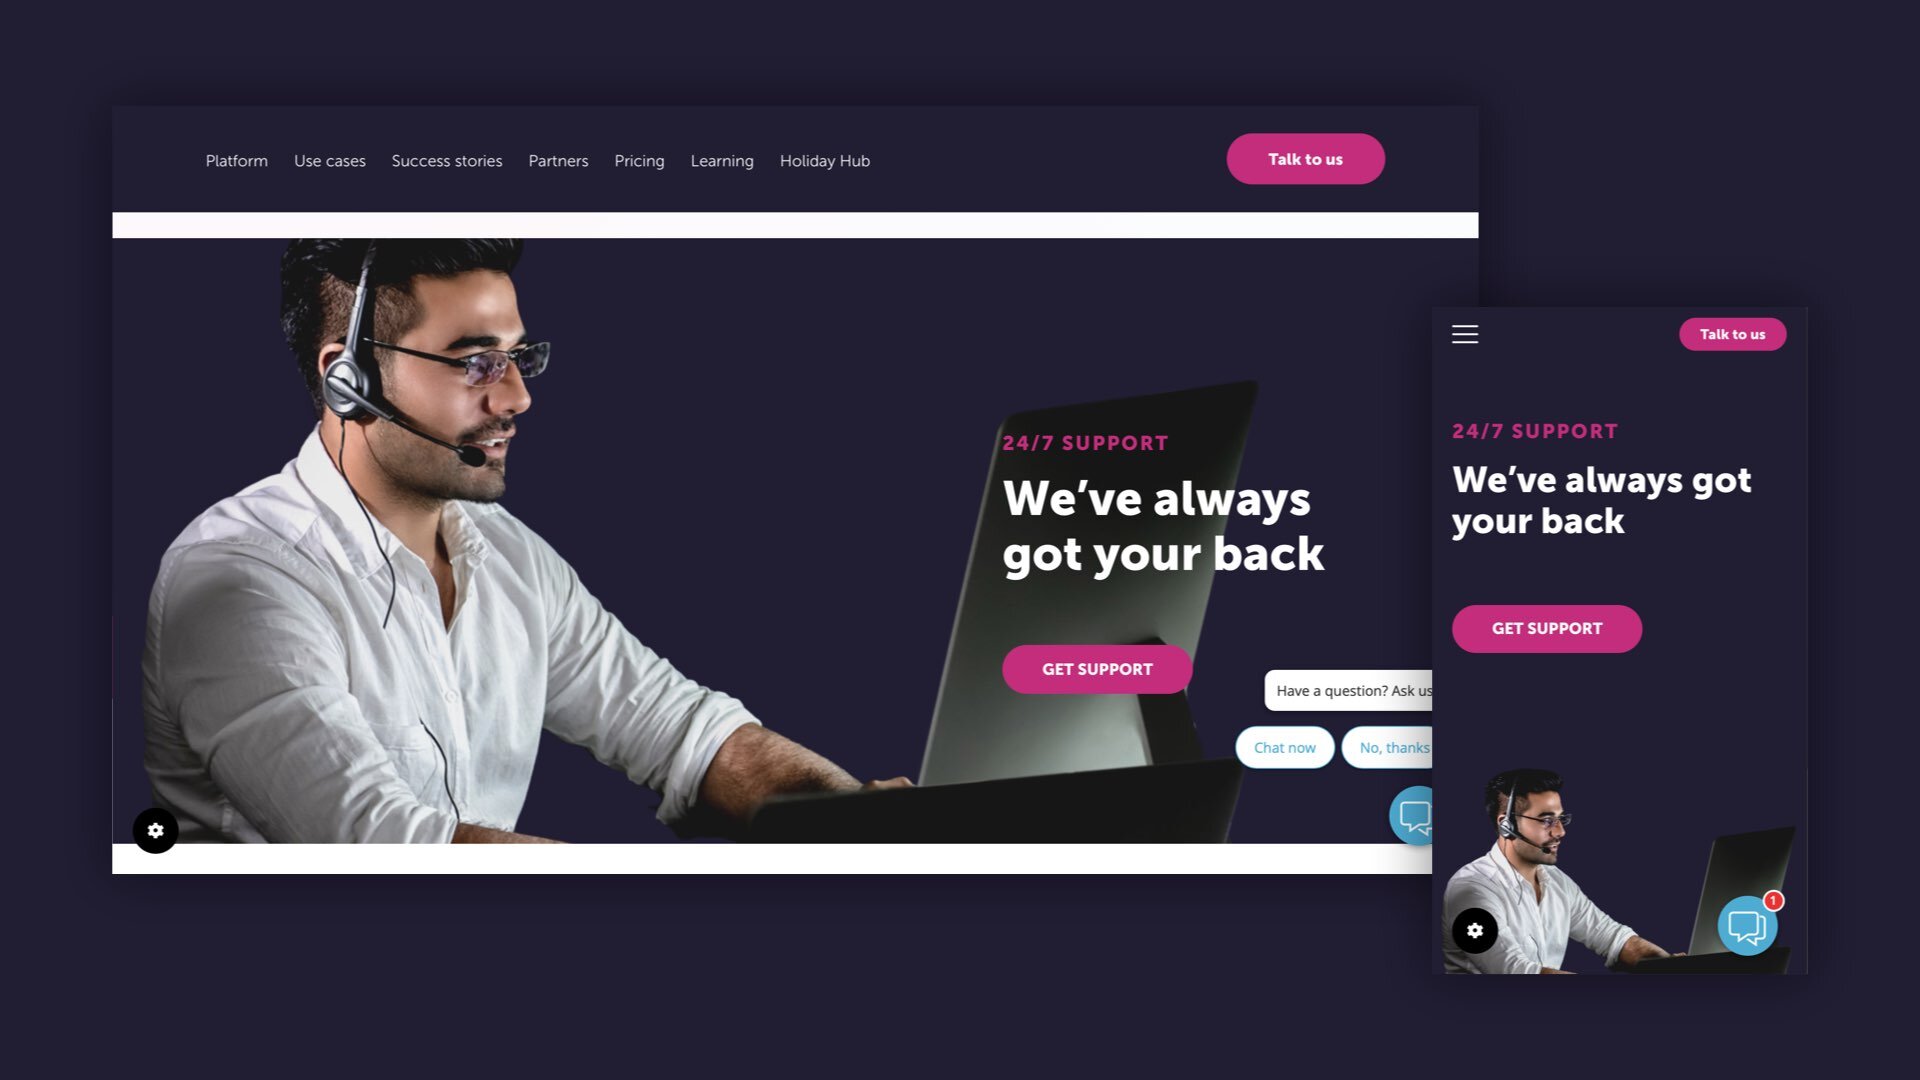 Website design examples for dotditigal showing a support agent